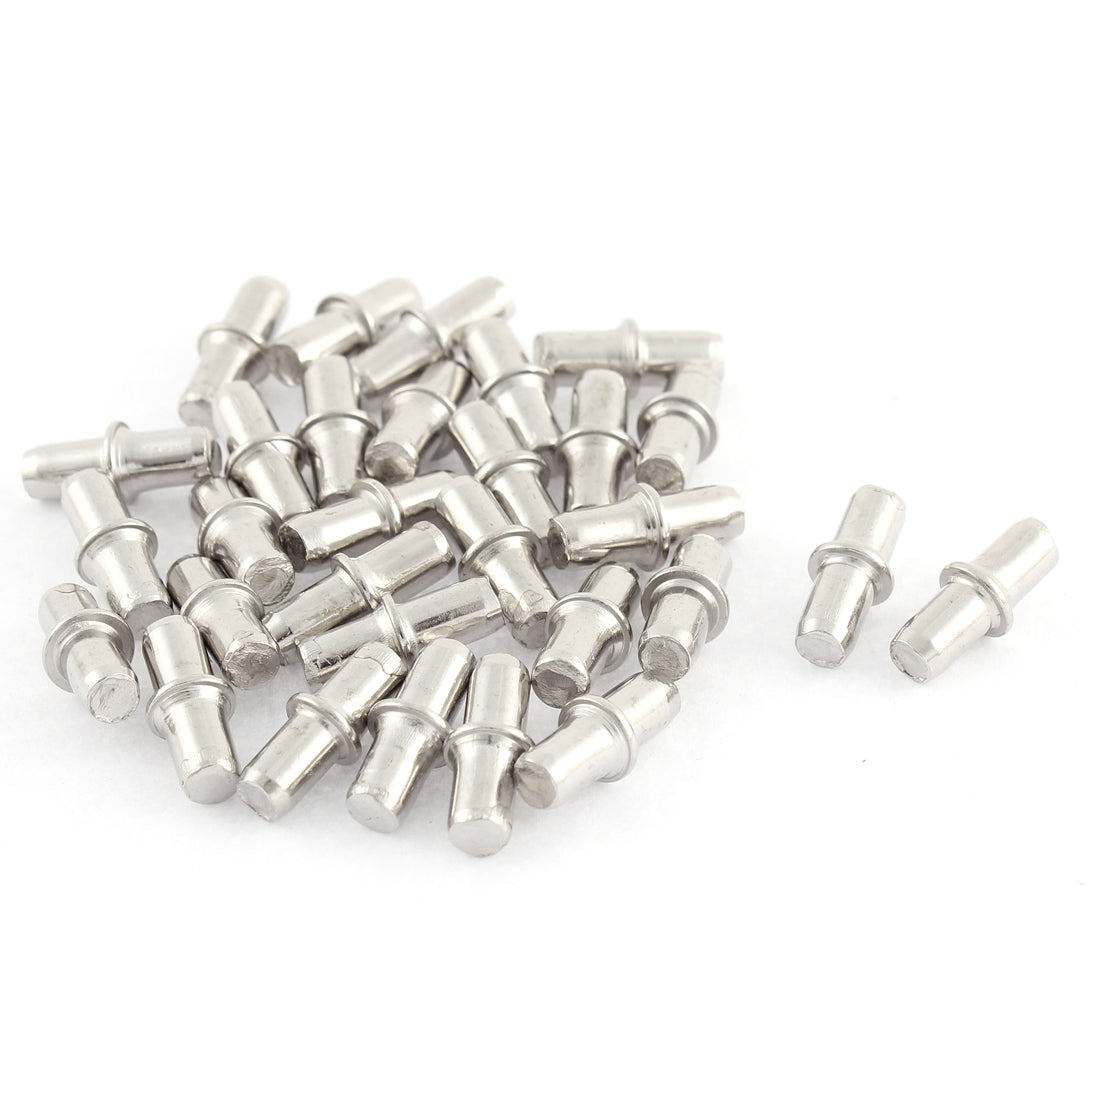 uxcell Uxcell 5mm x 17mm Furniture Cupboard Hardware Metal Shelf Support Pins Silver Tone 30 Pcs